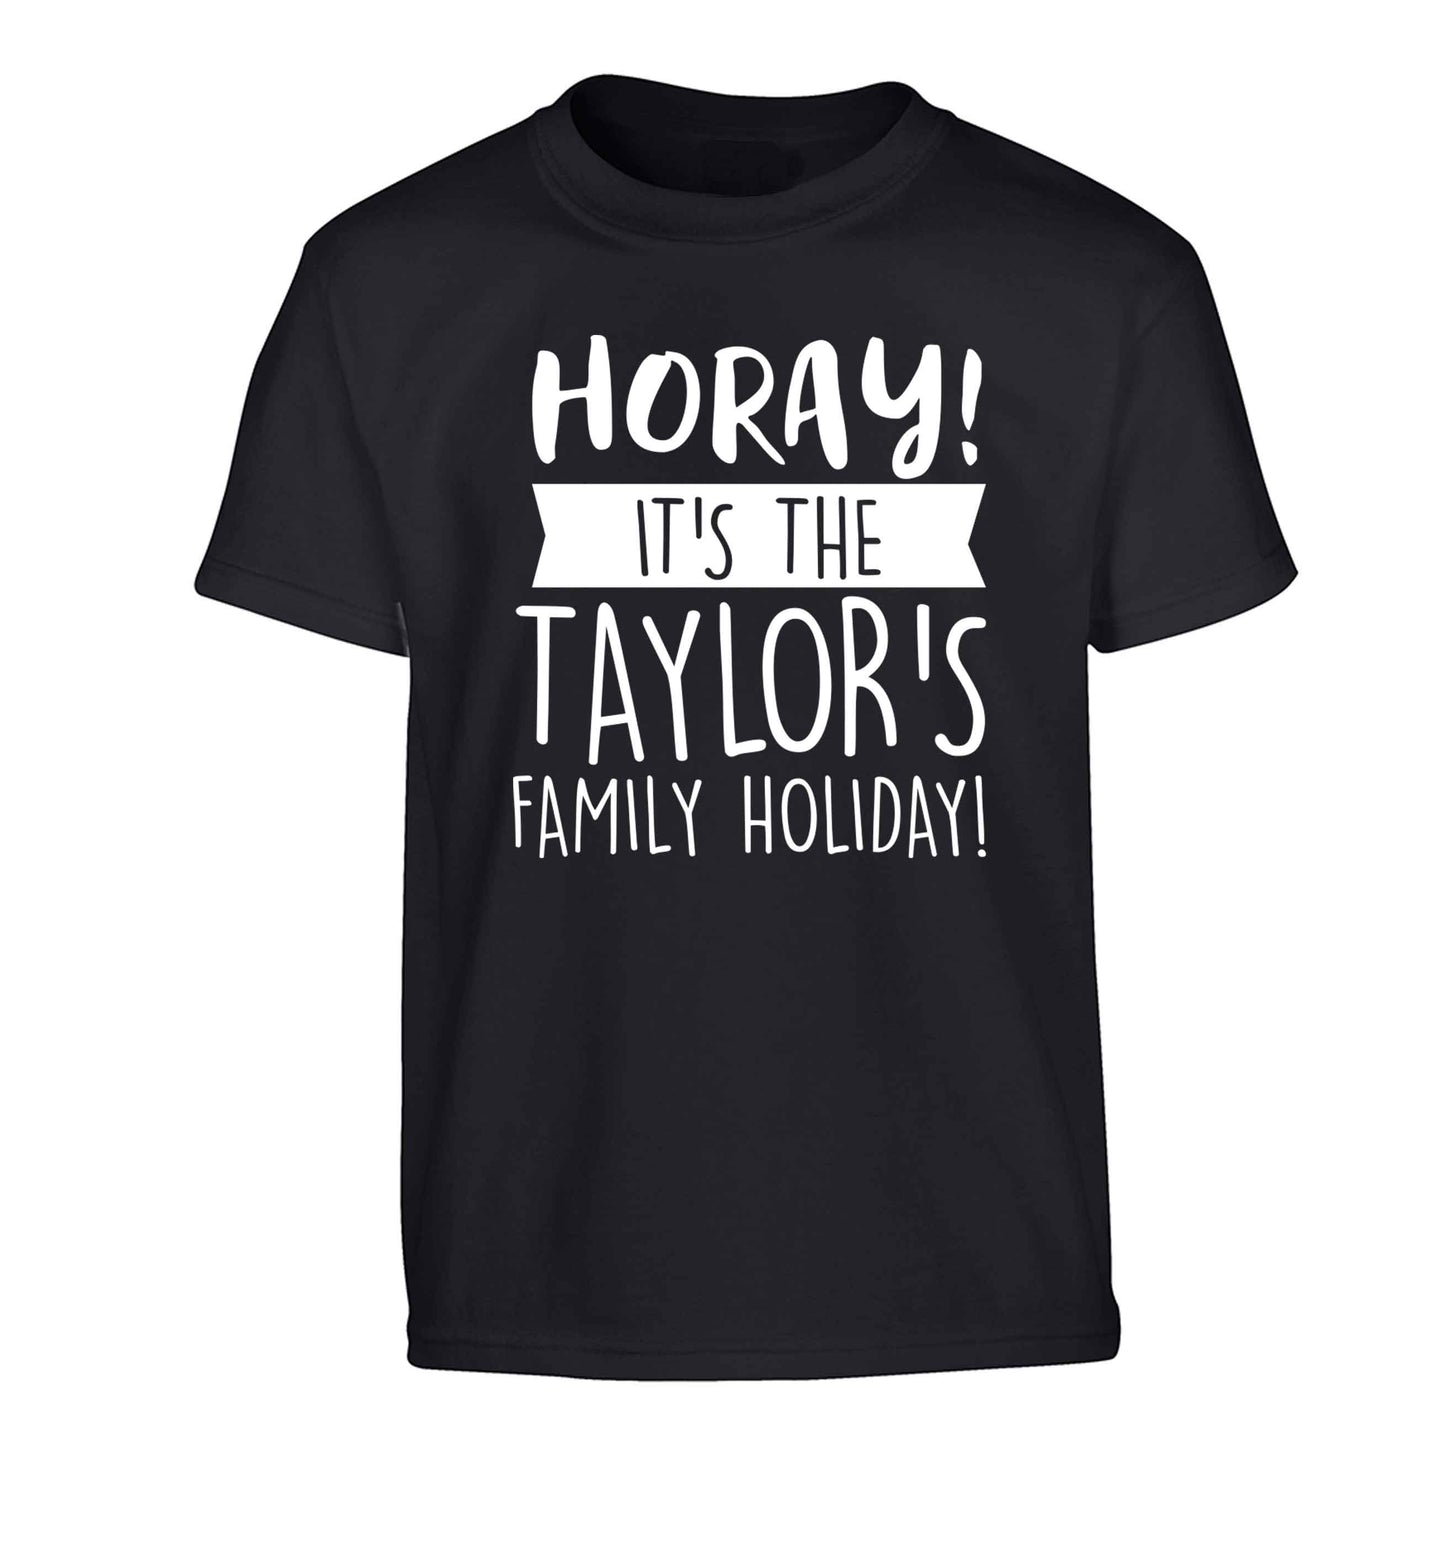 Horay it's the Taylor's family holiday! personalised item Children's black Tshirt 12-13 Years